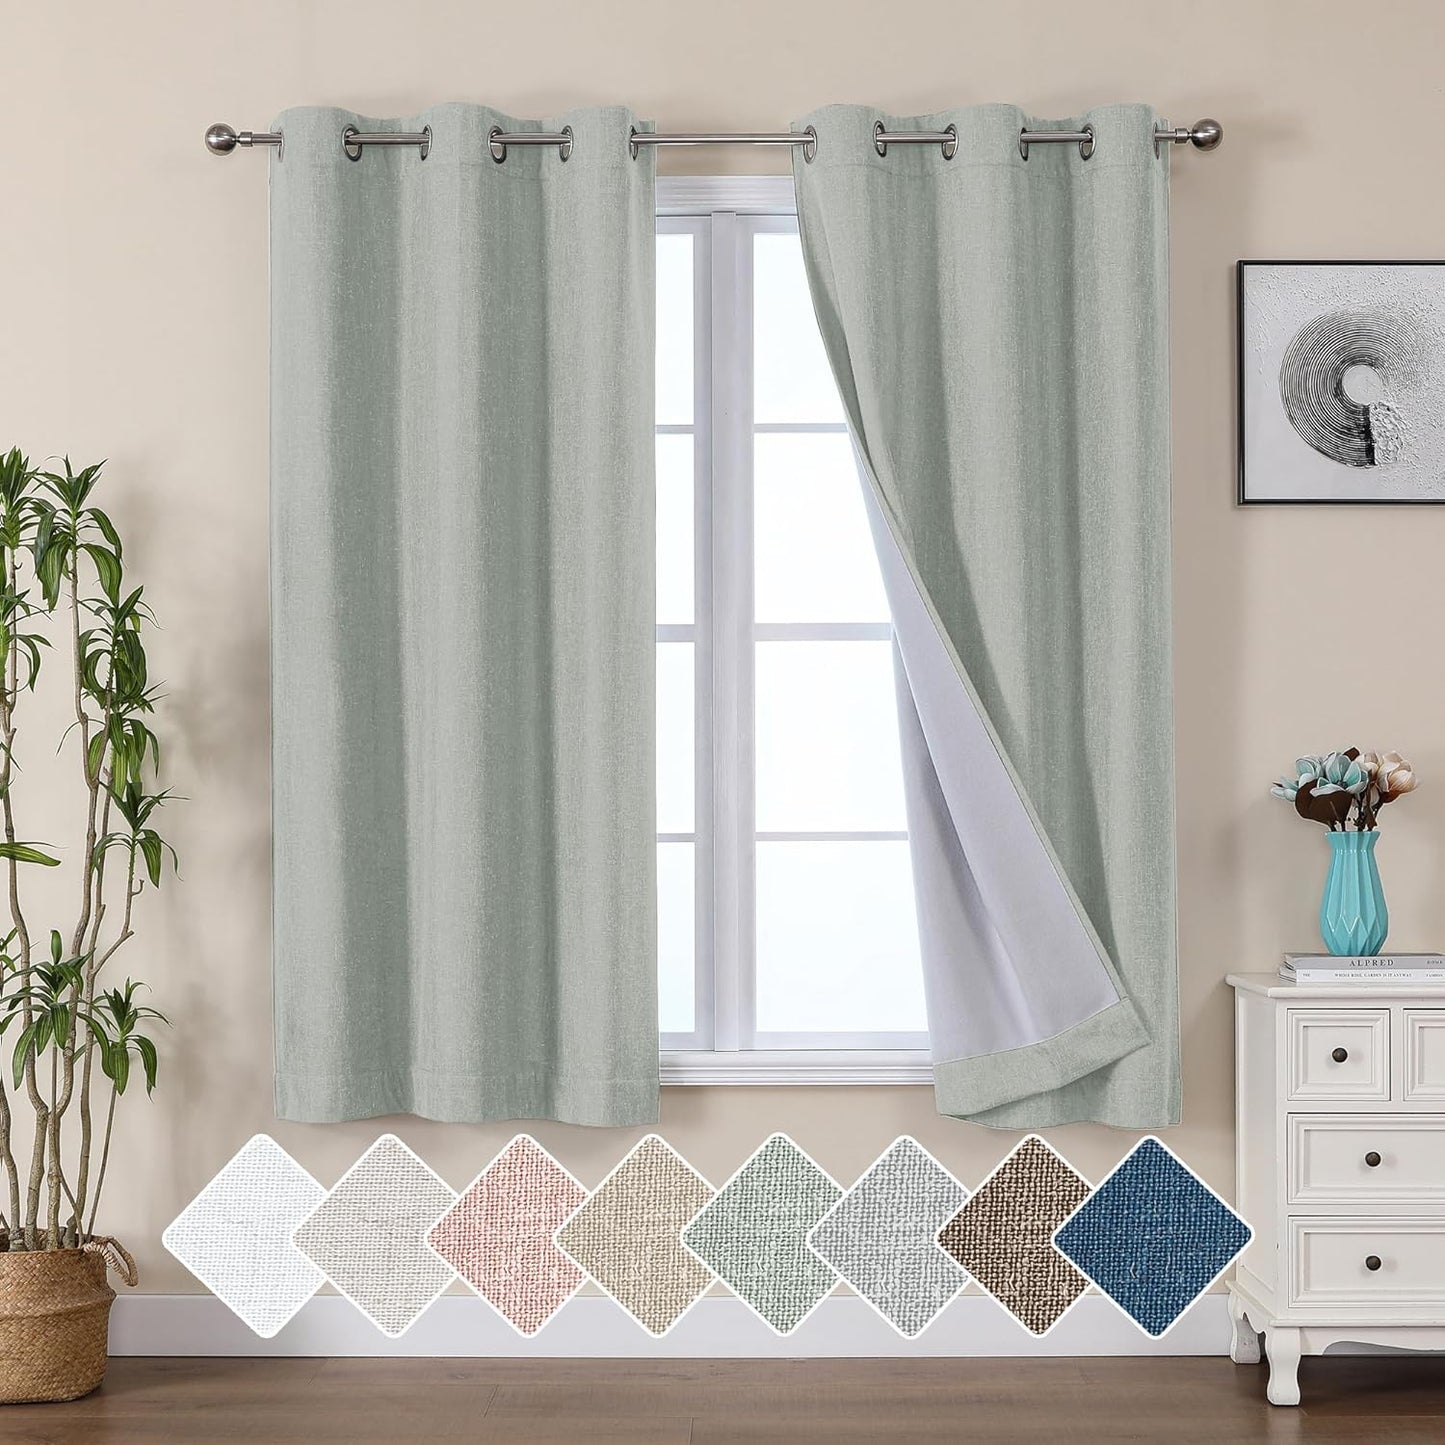 Jenny Ivory Beige Textured Linen 100% Blackout Curtains 63 Inch Length 2 Panels, Energy Saving Window Treatment Heavy Curtain Drapes for Bedroom/Living Room, Burlap Fabric Curtains, 38W  Simplebrand Sea Green 38"W X 54"L 